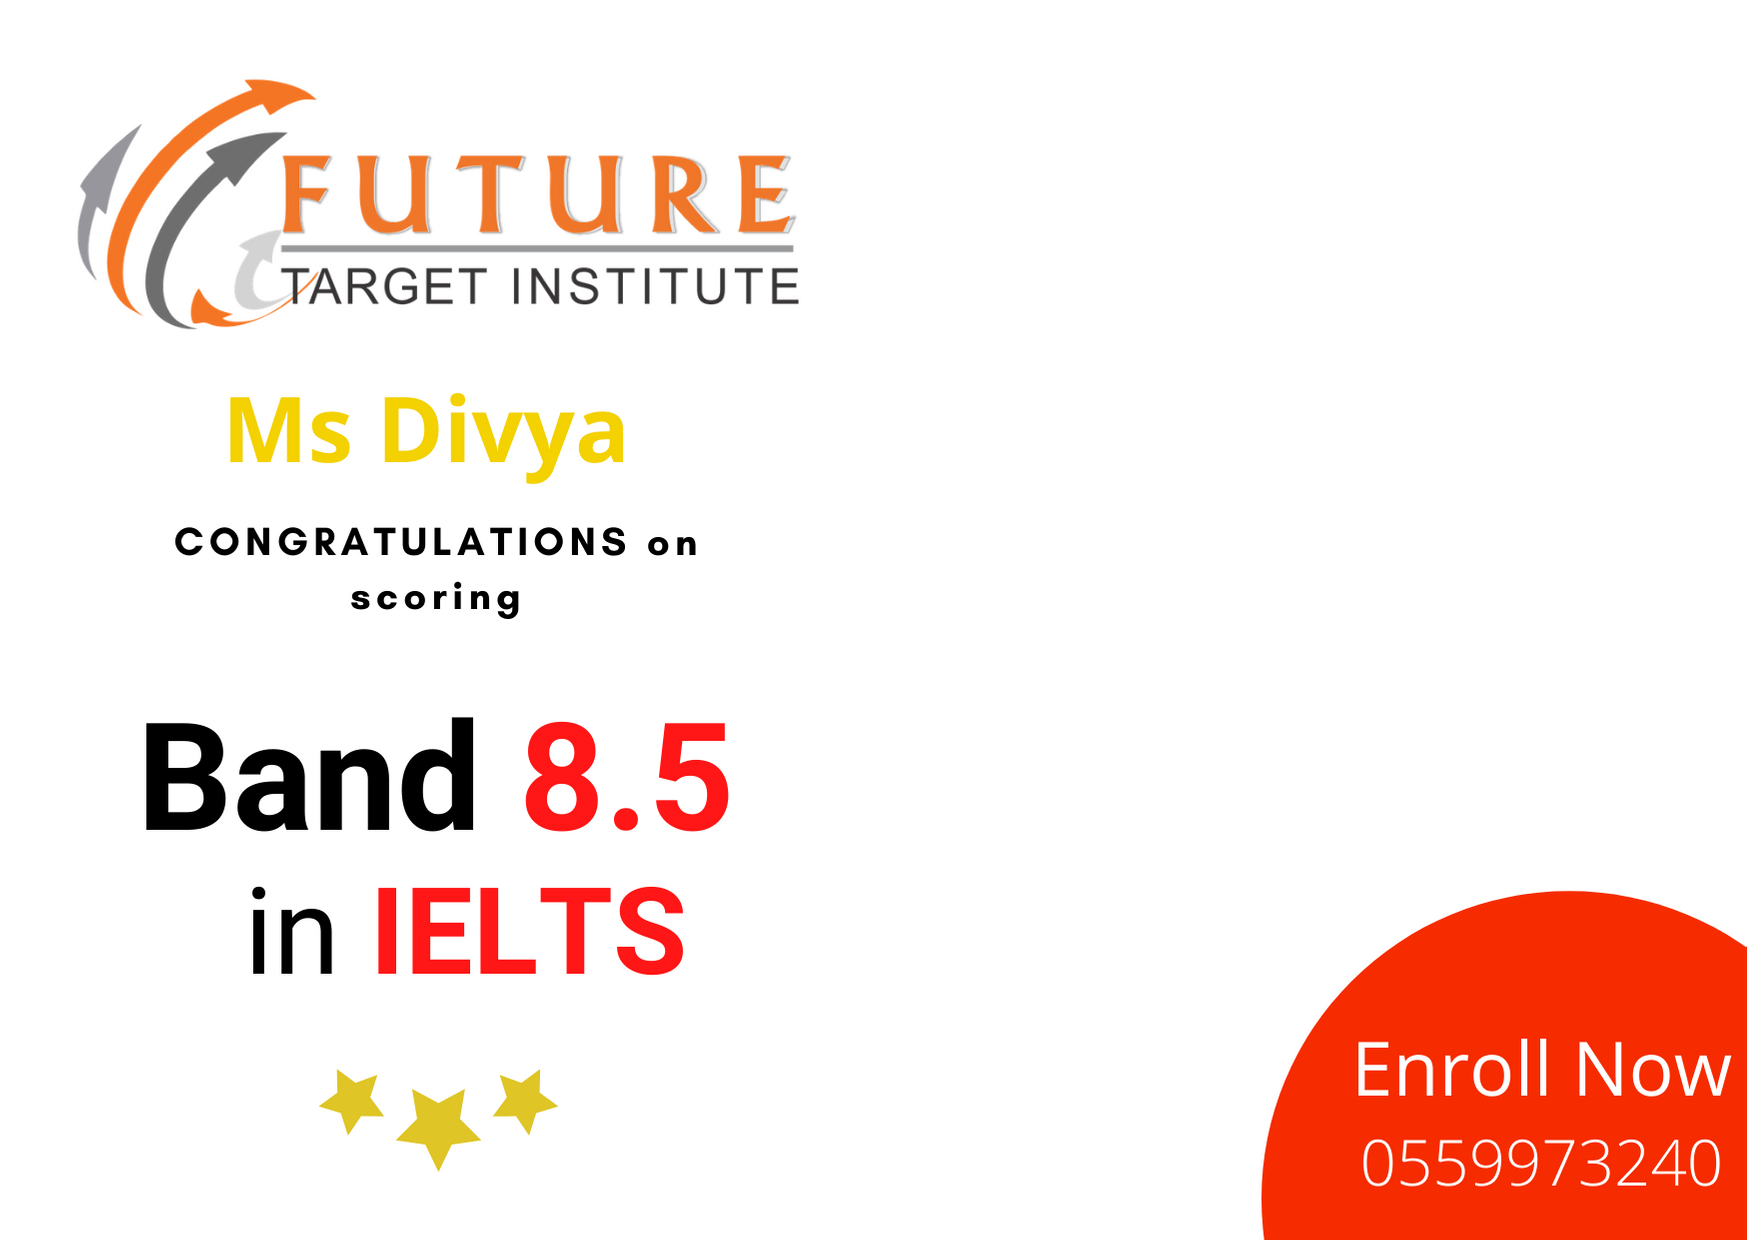 The success story of Mr Ankur who scored Band 8.5 in the IELTS Result with the help of the Certified British Council Teachers at Future Target Institute Dubai.